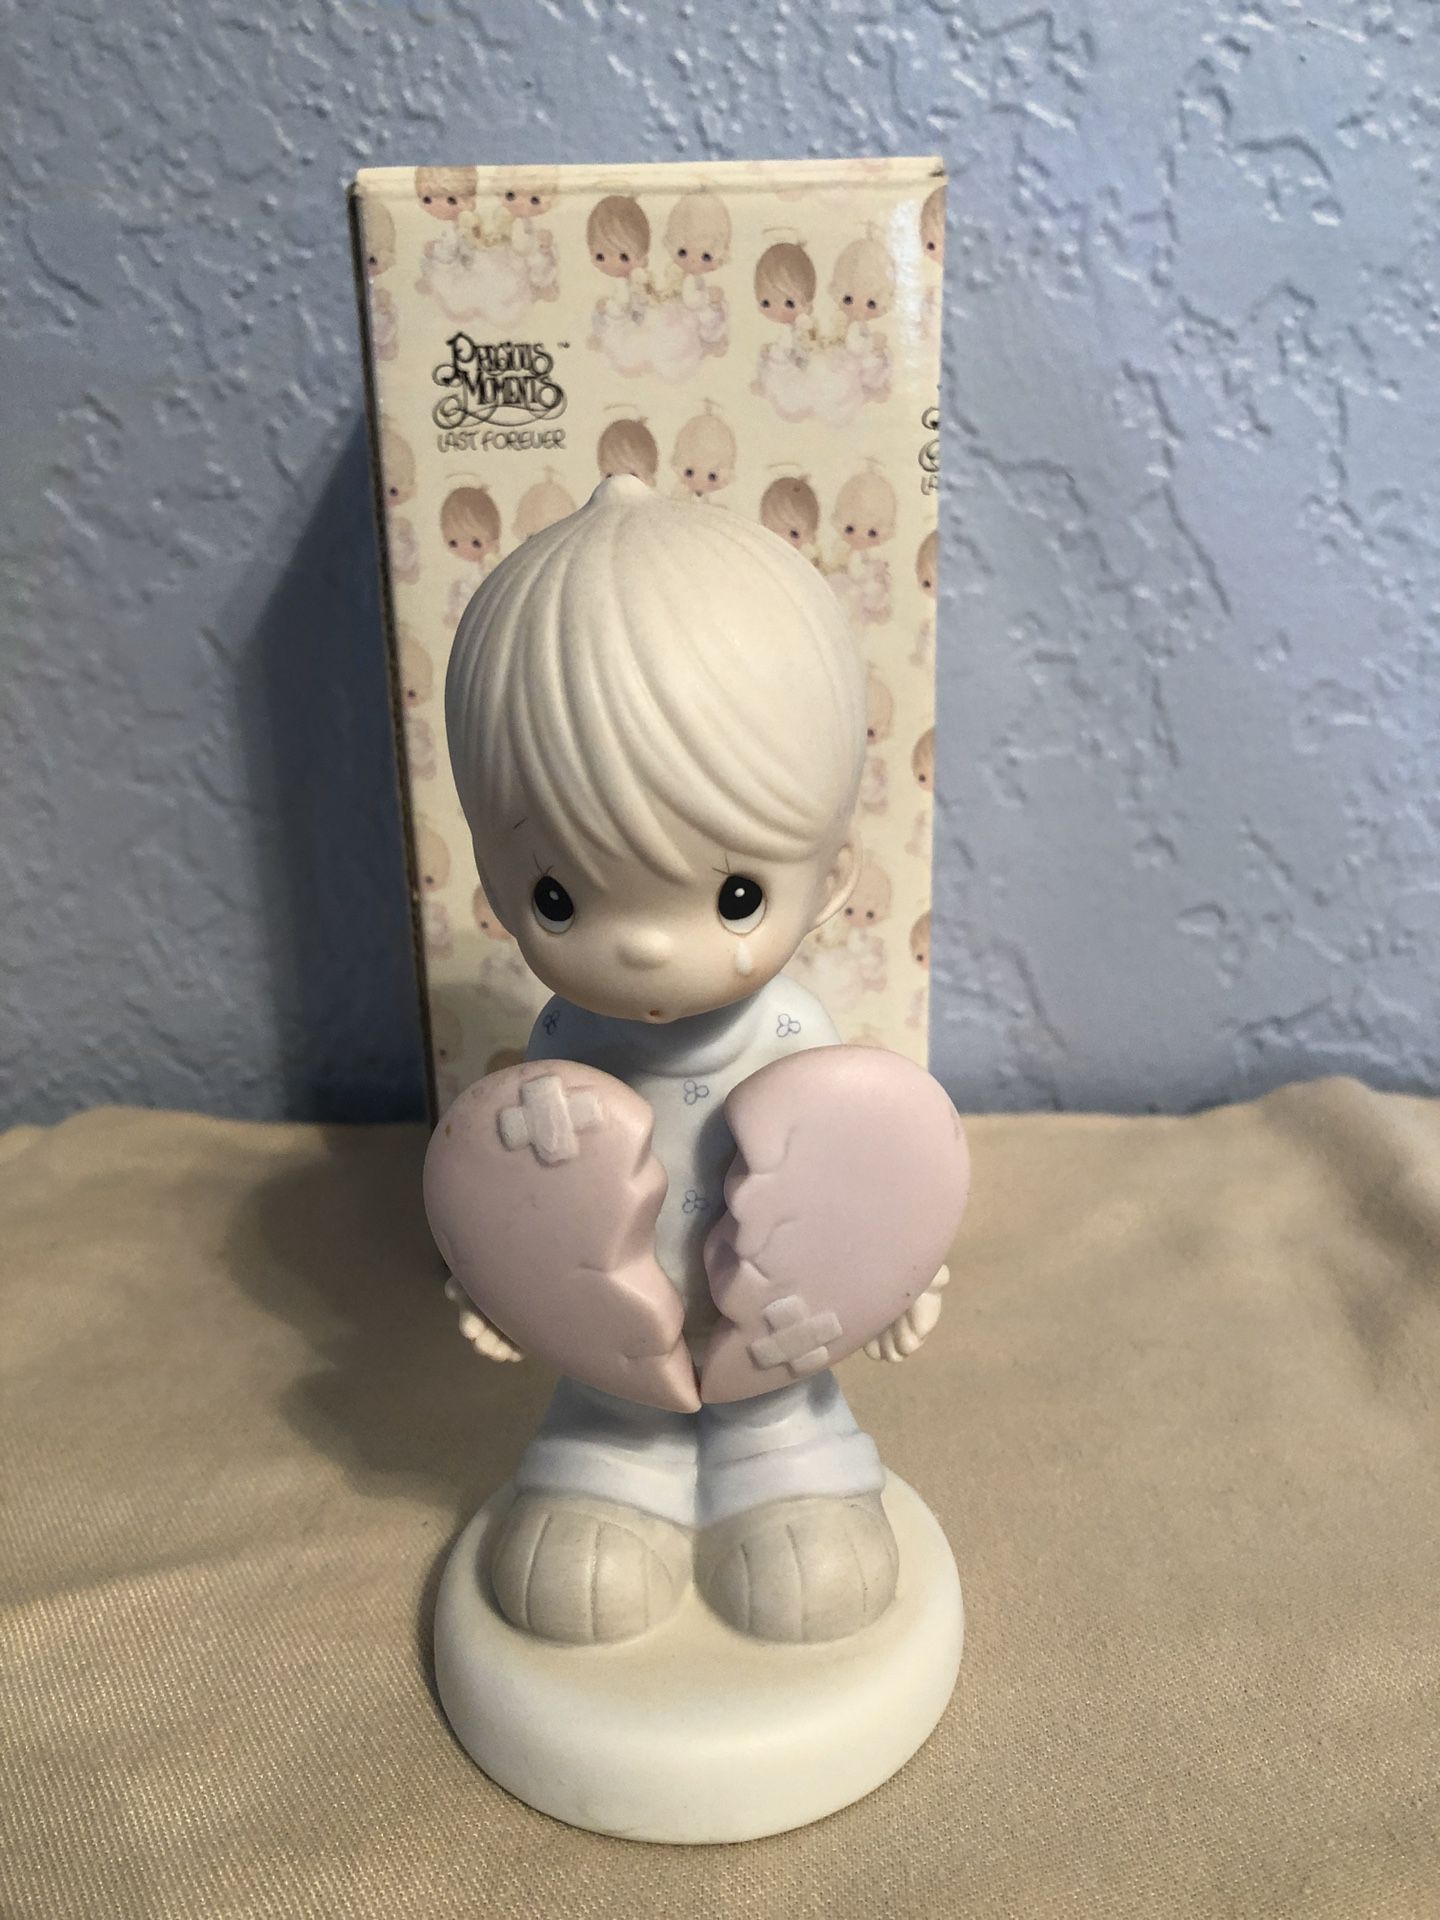 1987 Precious Moments Figurines “This Too Shall Pass” W/Box #114014